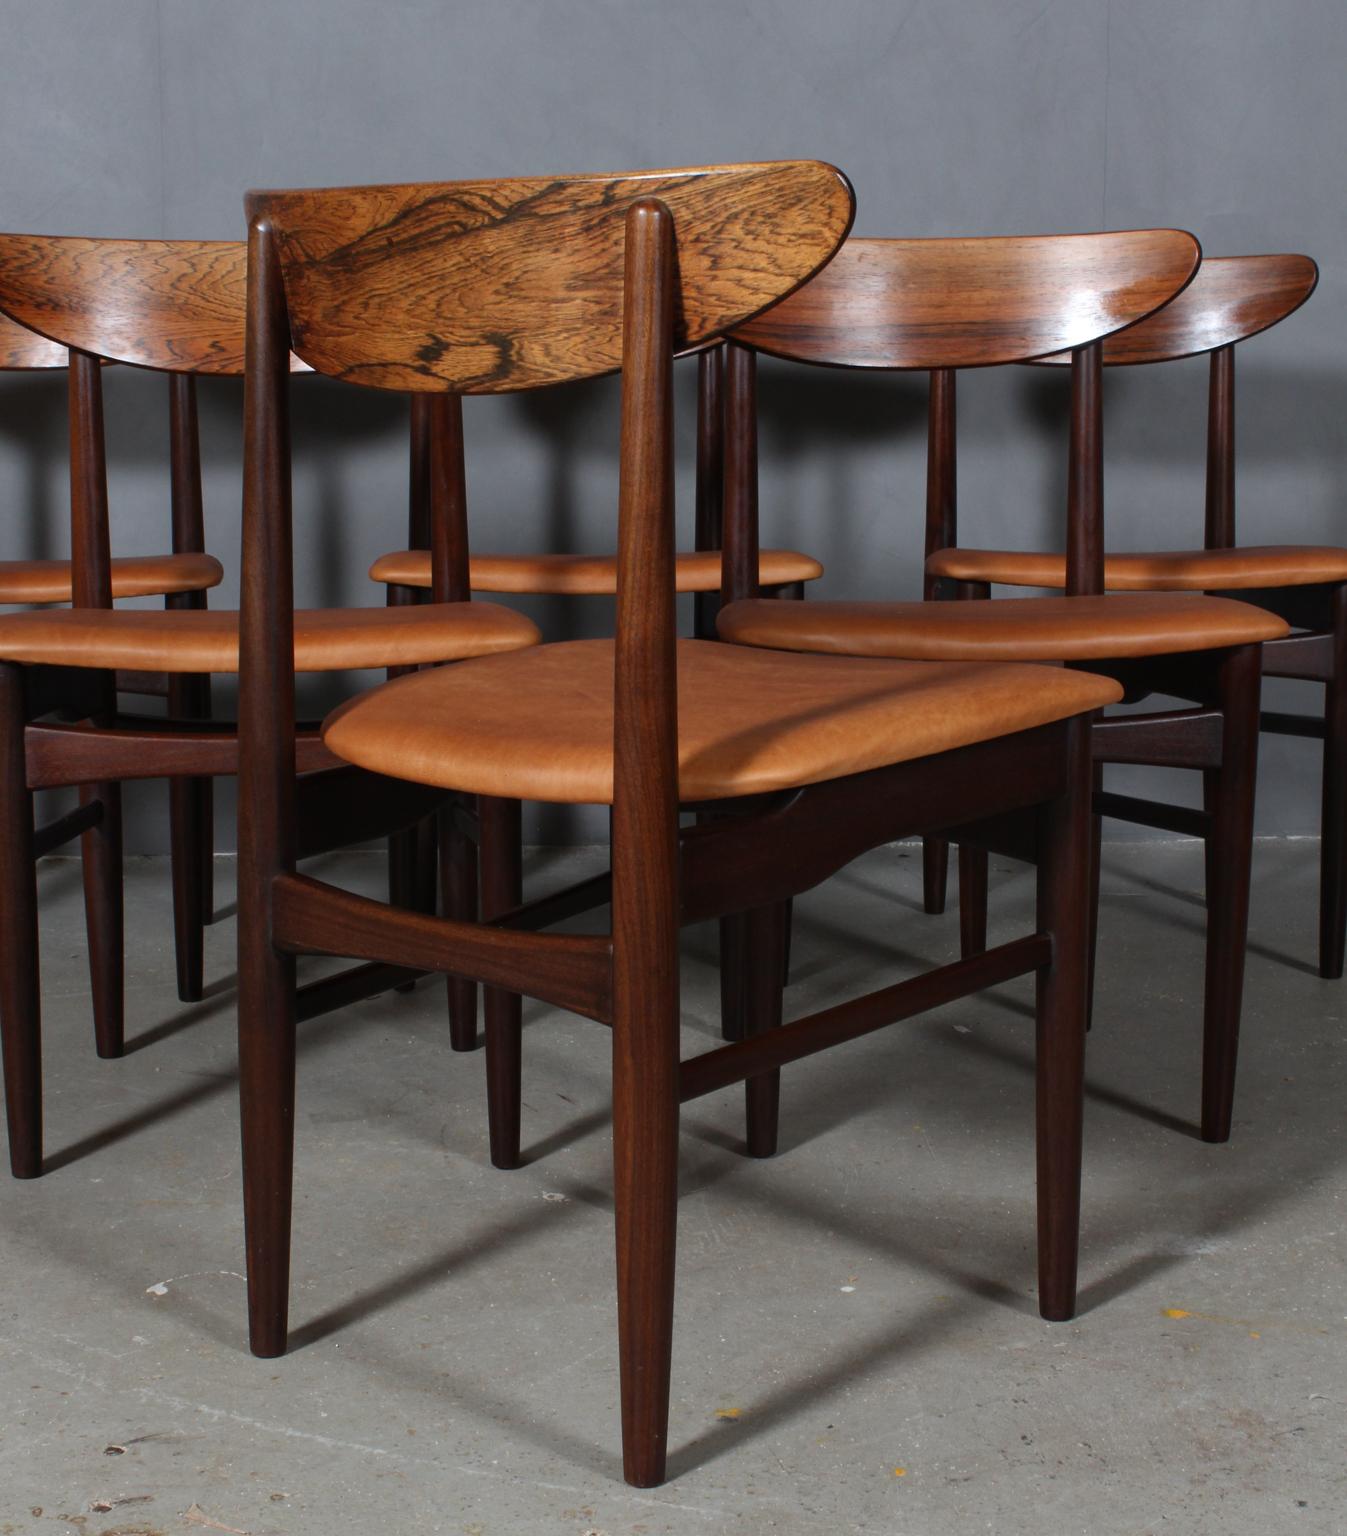 Mid-20th Century Skovby Møbler, Set of Six Chairs